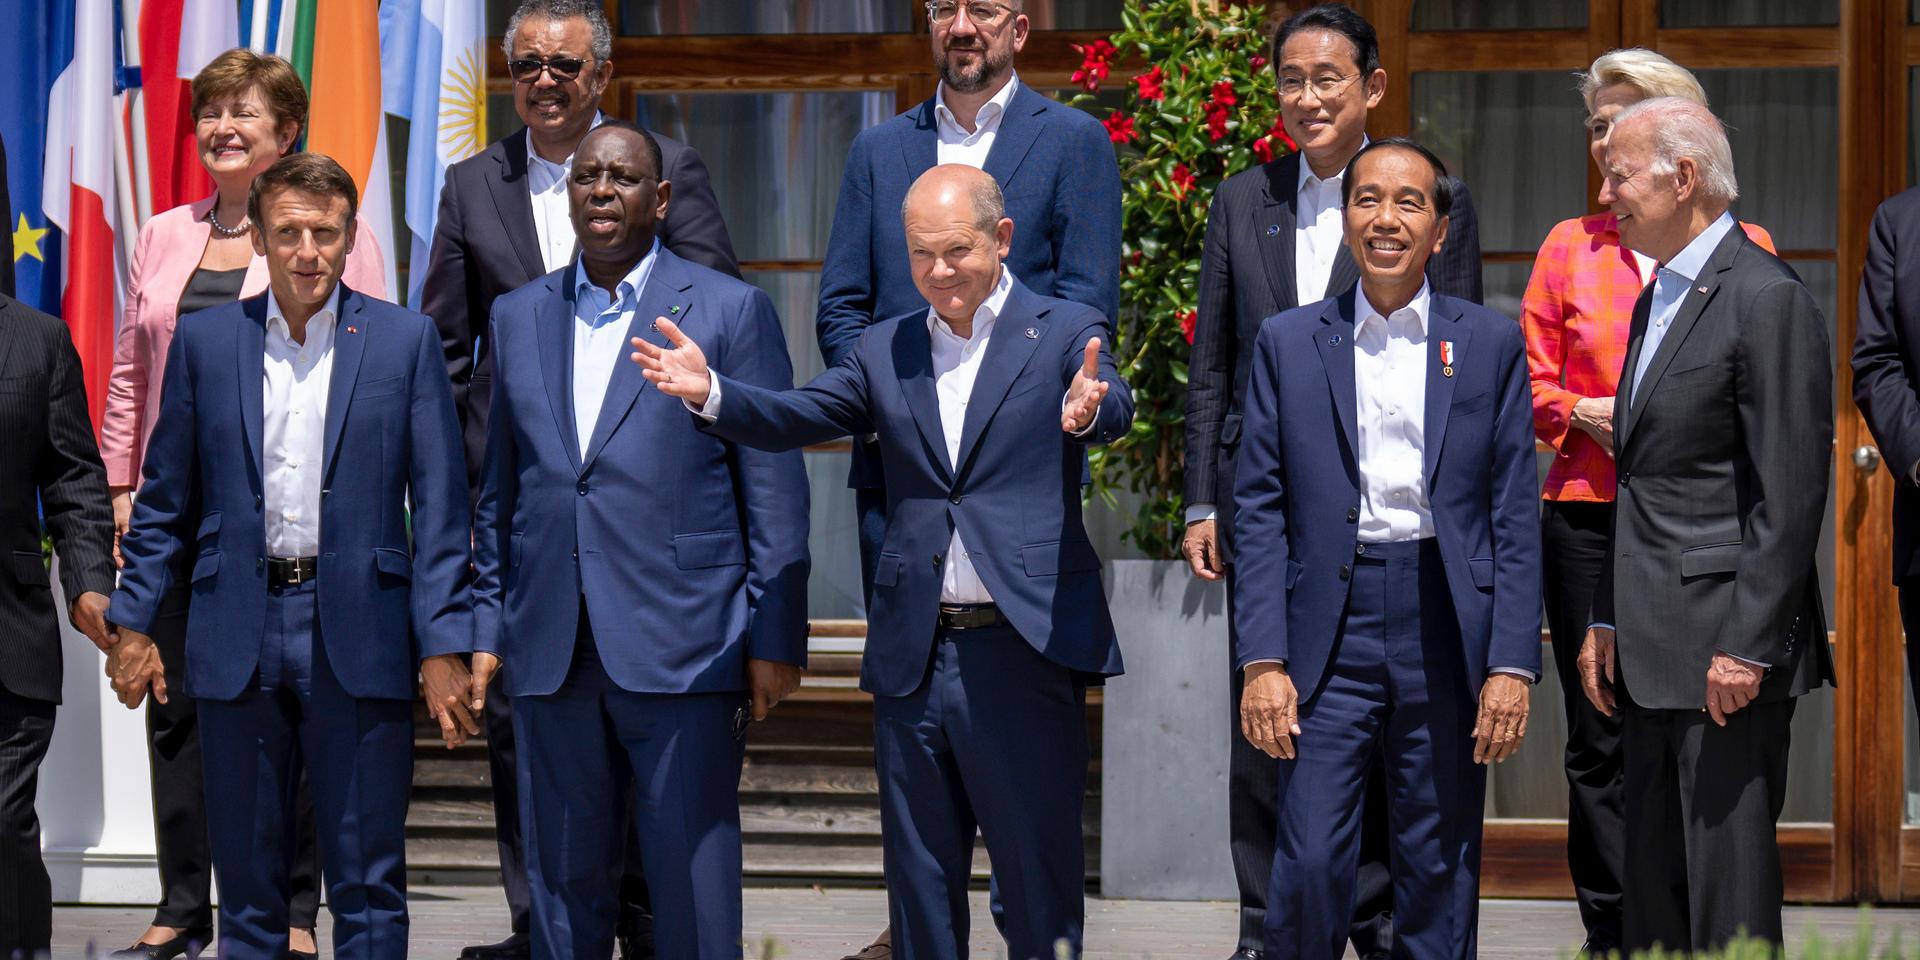 German Chancellor Olaf Scholz, centre stands between from foreground left, Emmanuel Macron, President of France, Macky Sall, President of Senegal, Jako Widodo, President of Indonesia, and U.S. President Joe Biden for a group photo with the outreach guests, at the G7 summit, in Kruen, Germany, Monday, June 27, 2022. . The Group of Seven leading economic powers are meeting in Germany for their annual gathering Sunday through Tuesday. (Michael Kappeler/Pool Photo via AP)  AMB106